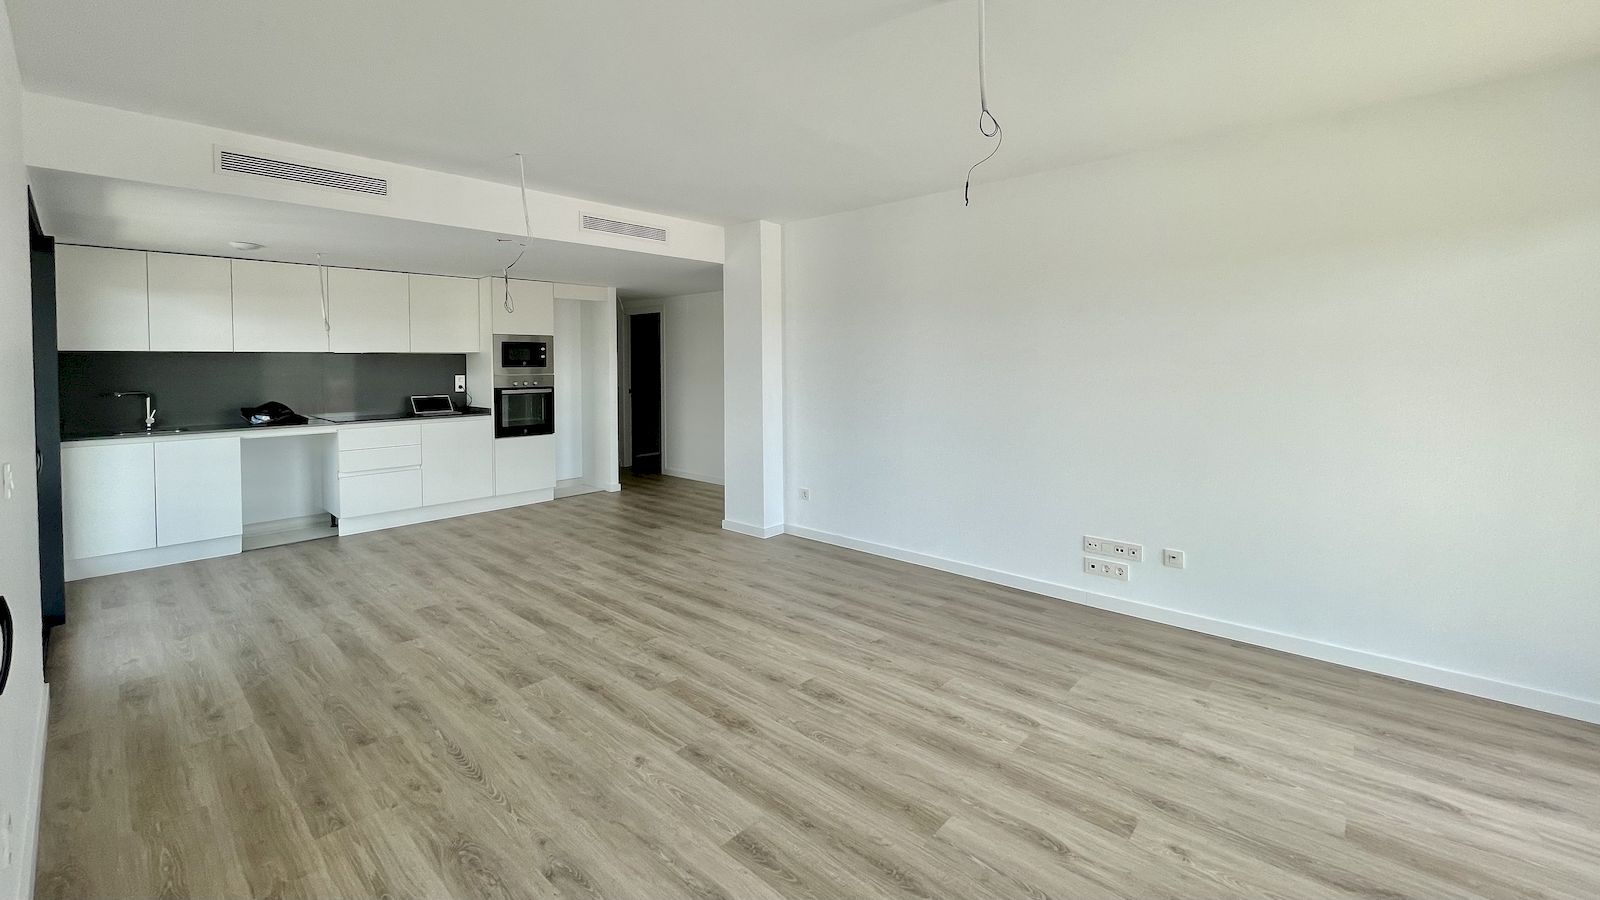 Penthouse Apartment for Sale in Javea - Brand new building.